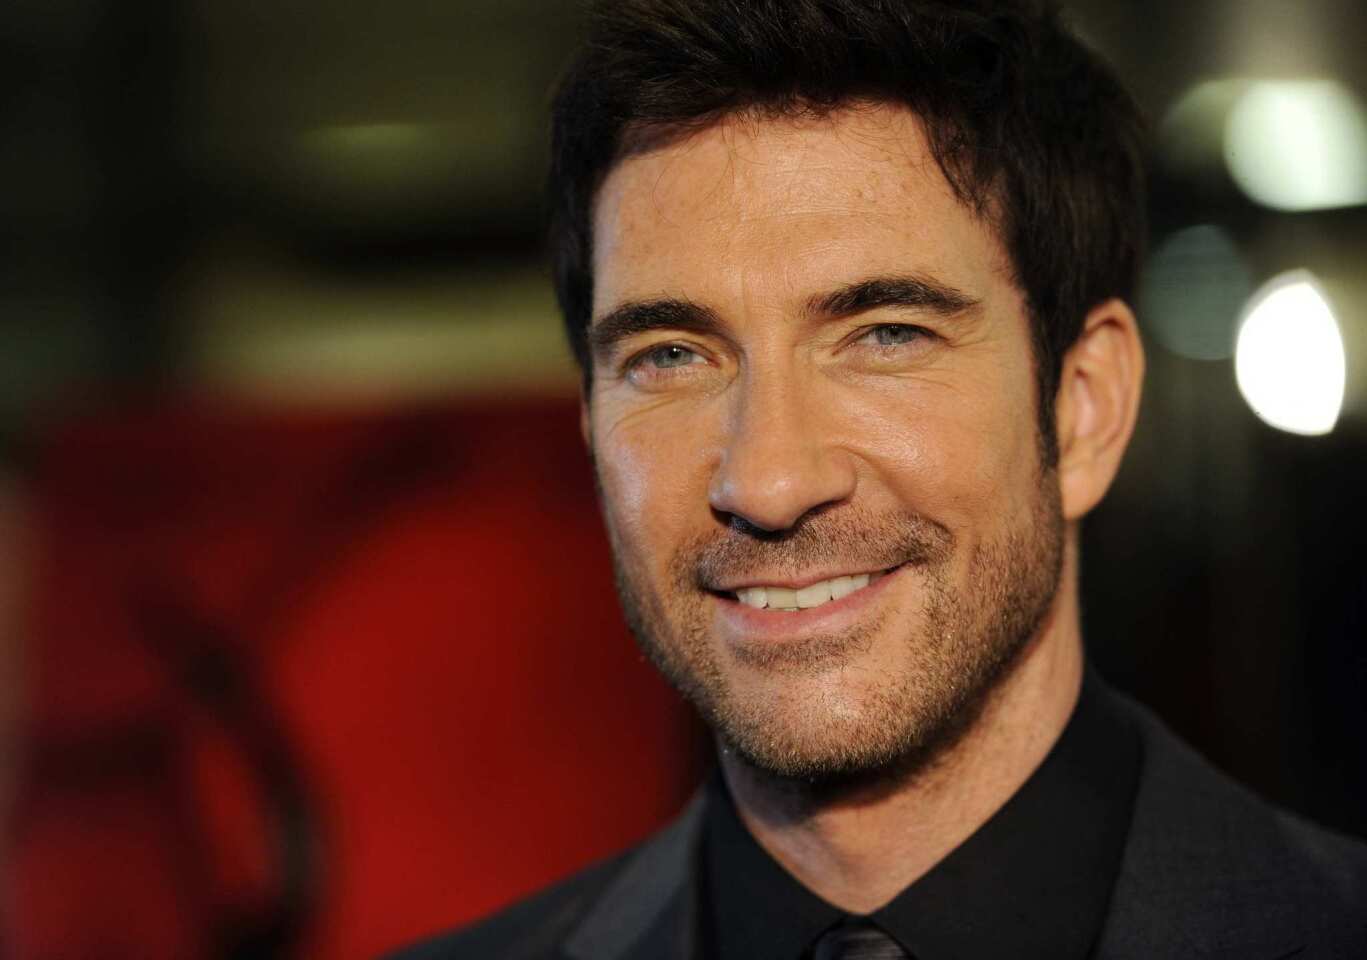 Dylan McDermott plays Ben Harmon, a man who moves his family from Boston to Los Angeles in an effort to cope with infidelity and a miscarriage and rebuild their relationship. But he and his wife (played by Connie Britton, formerly of "Friday Night Lights") find their new home brings with it other problems, eerie ones. McDermott and his costars hit the premiere of the FX series on Monday at the Cinerama Dome in Los Angeles. The series starts Oct. 5.